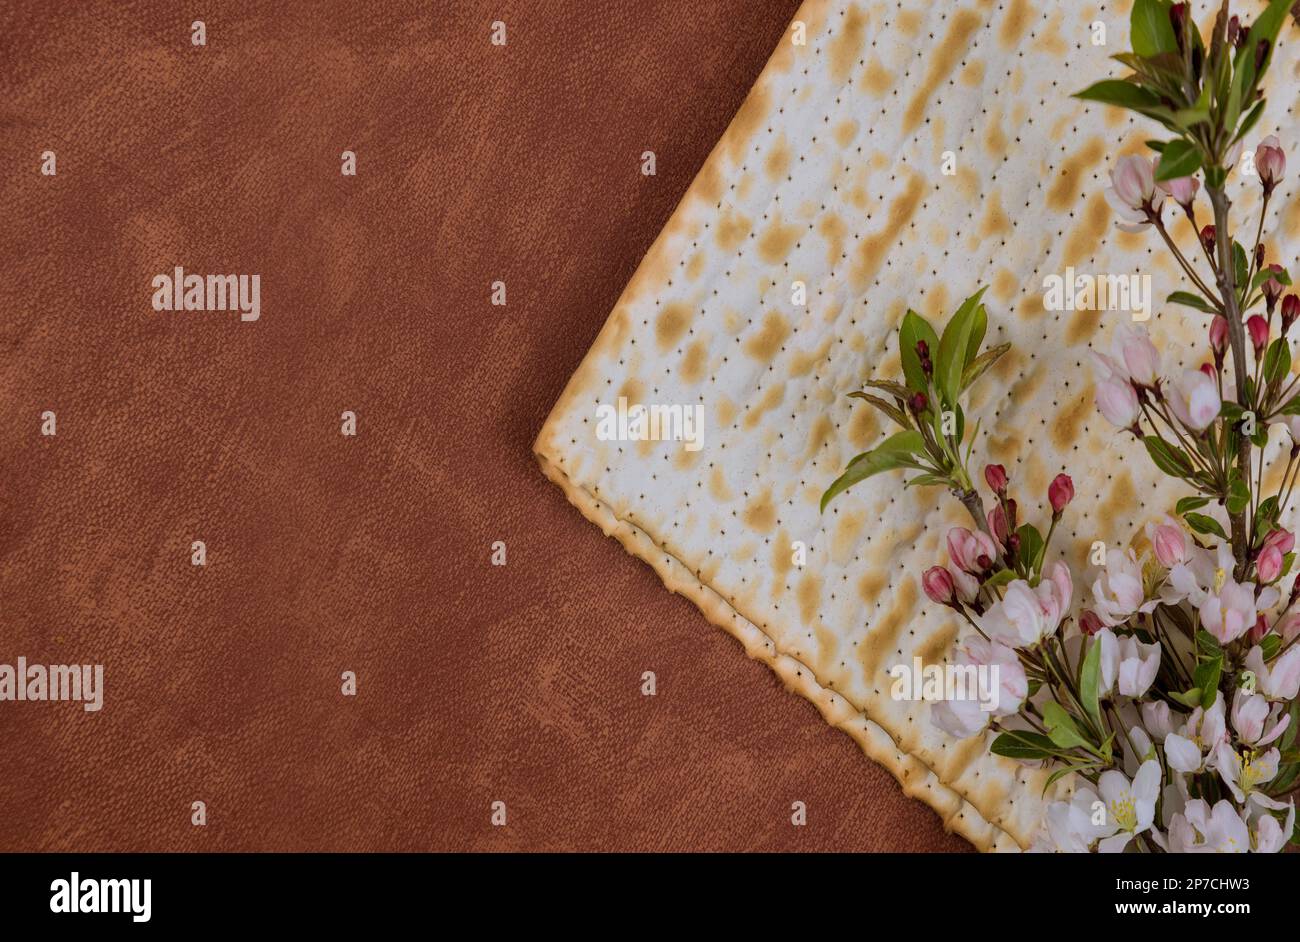 Unleavened matzah bread eaten during Passover is symbol of haste with which Jewish people left Egypt. Stock Photo